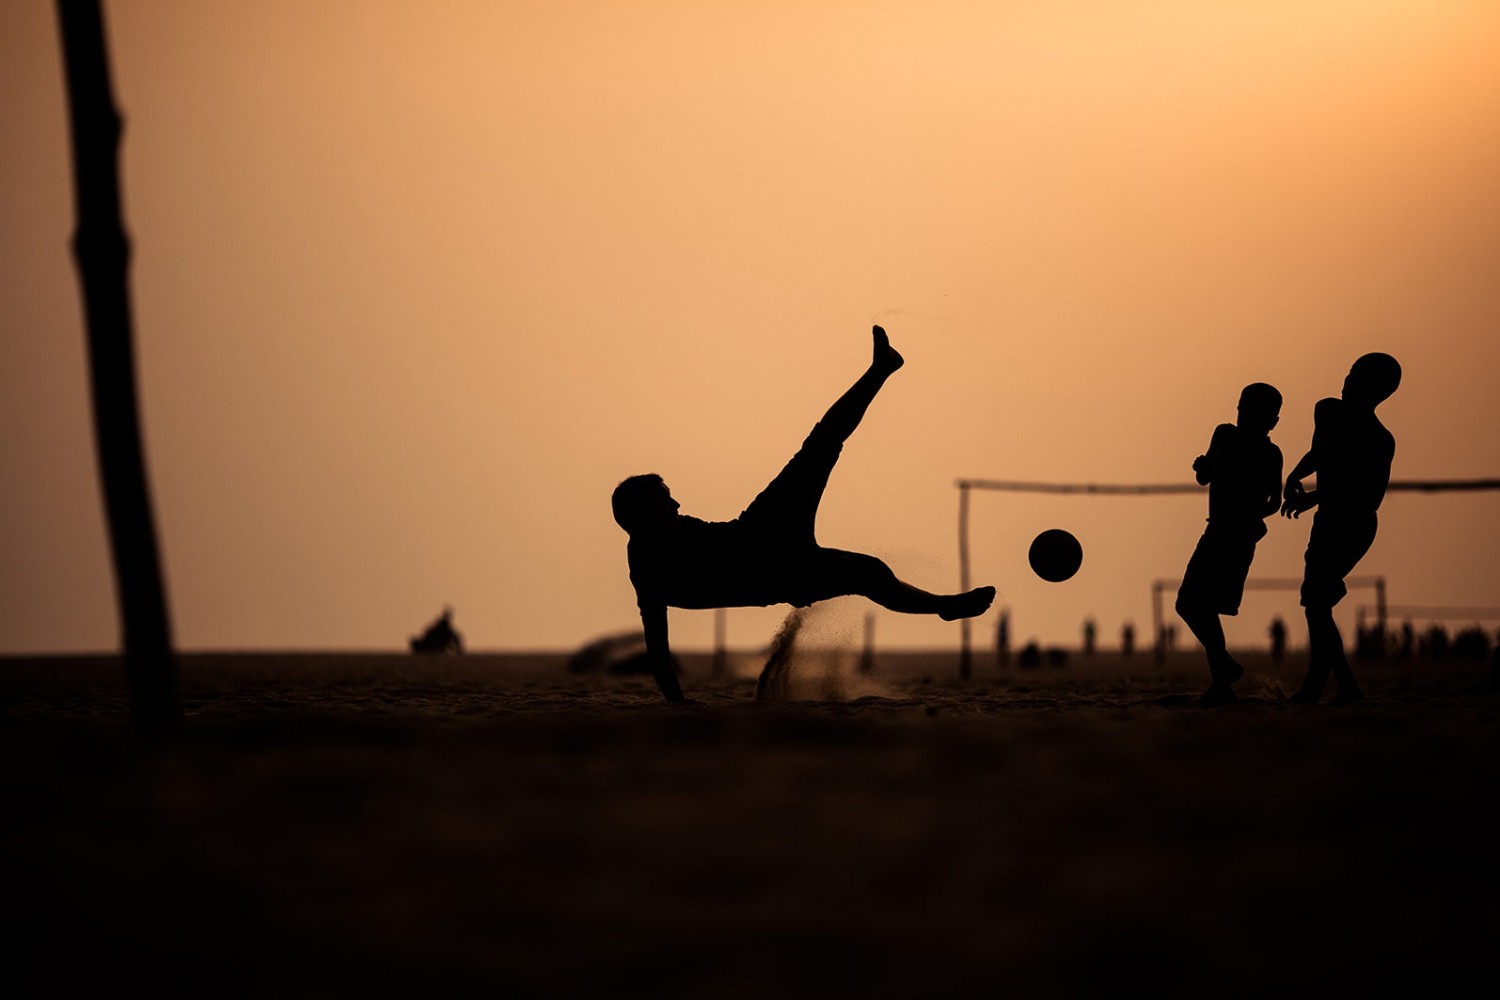 Action Packed Photo Of People Playing Football Soccer At Sunset